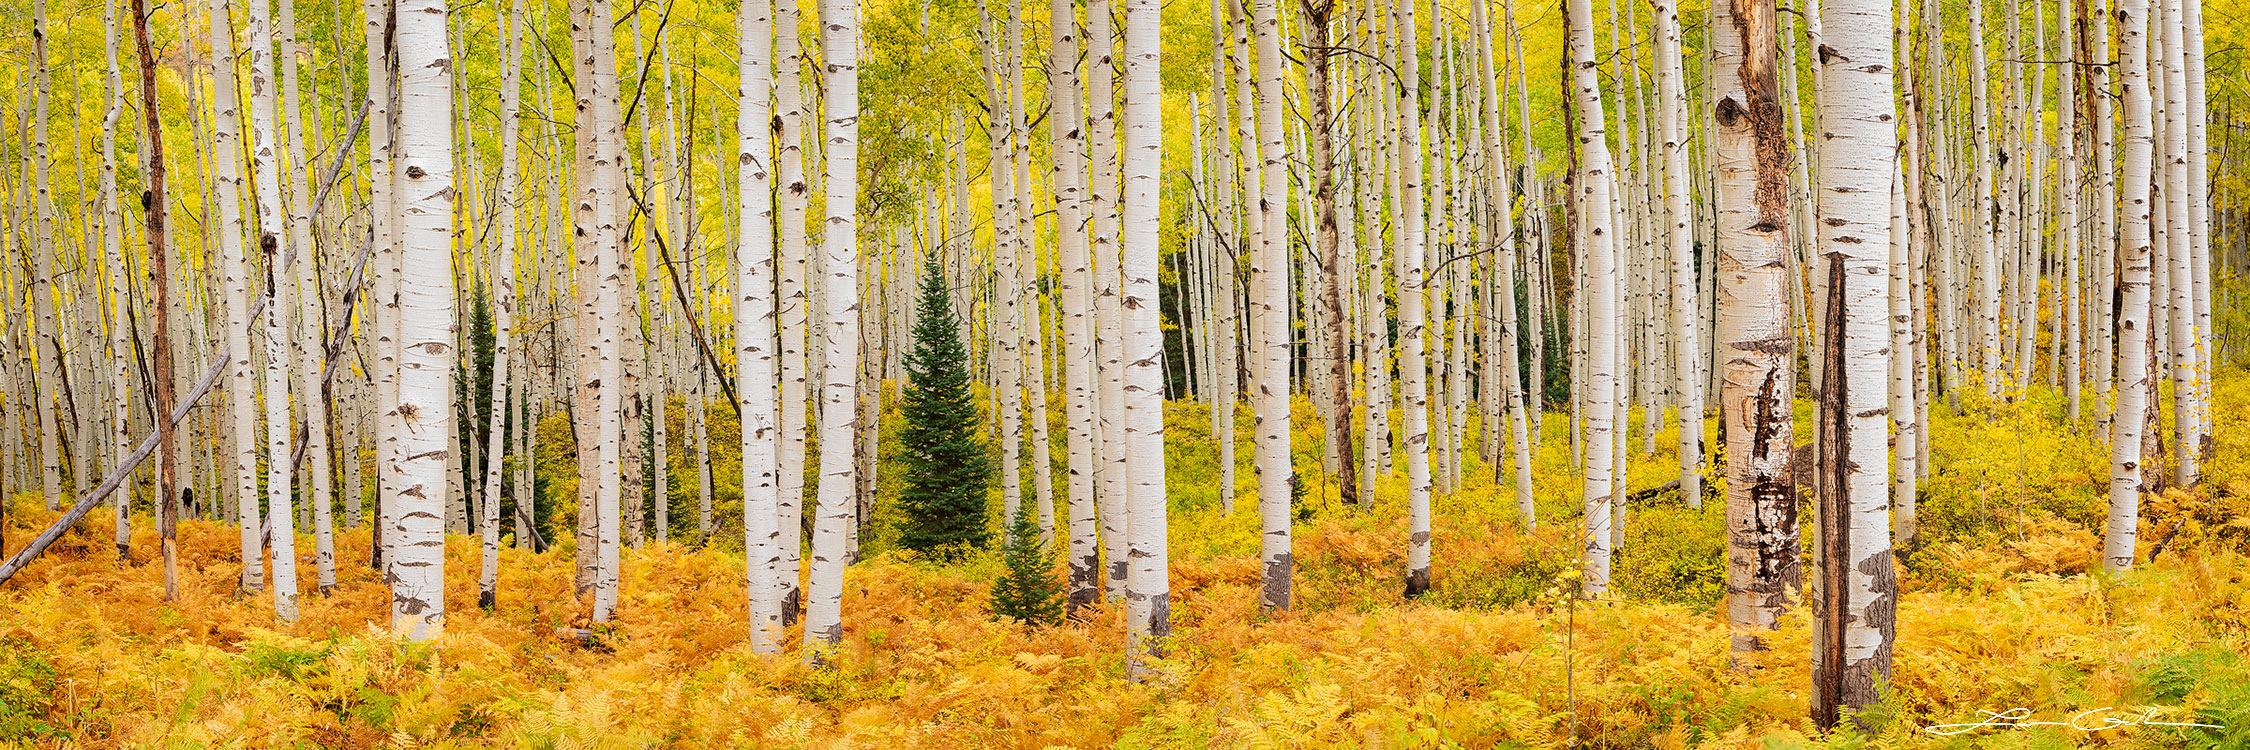 White trunk aspen trees painting a mesmerizing canvas of fall colors in a serene forest landscape. Vivid hues of red, gold, and orange intermingle with occasional greenery, capturing the essence of Colorado's autumn. Spruce trees break the warm tones, while rich ferns carpet the forest floor, creating a tranquil, breathtaking scene of nature's beauty.- Gintchin Fine Art